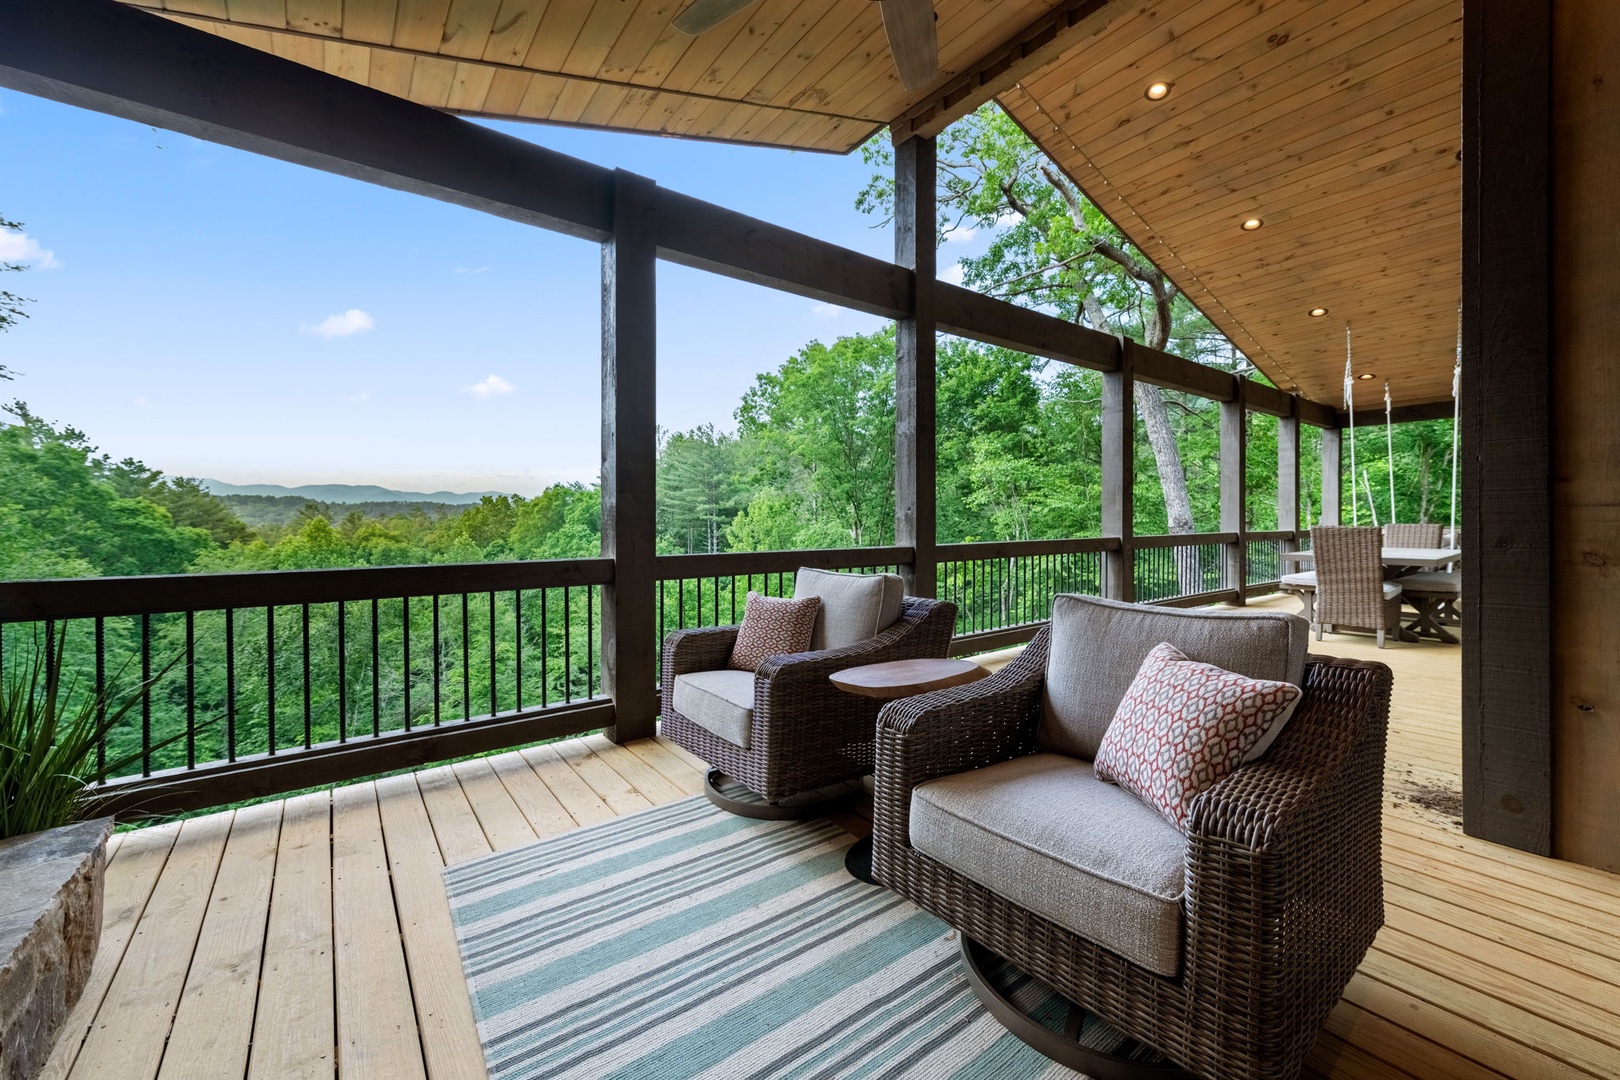 Rich Mountain Chateau Entry Level Deck Seating Area